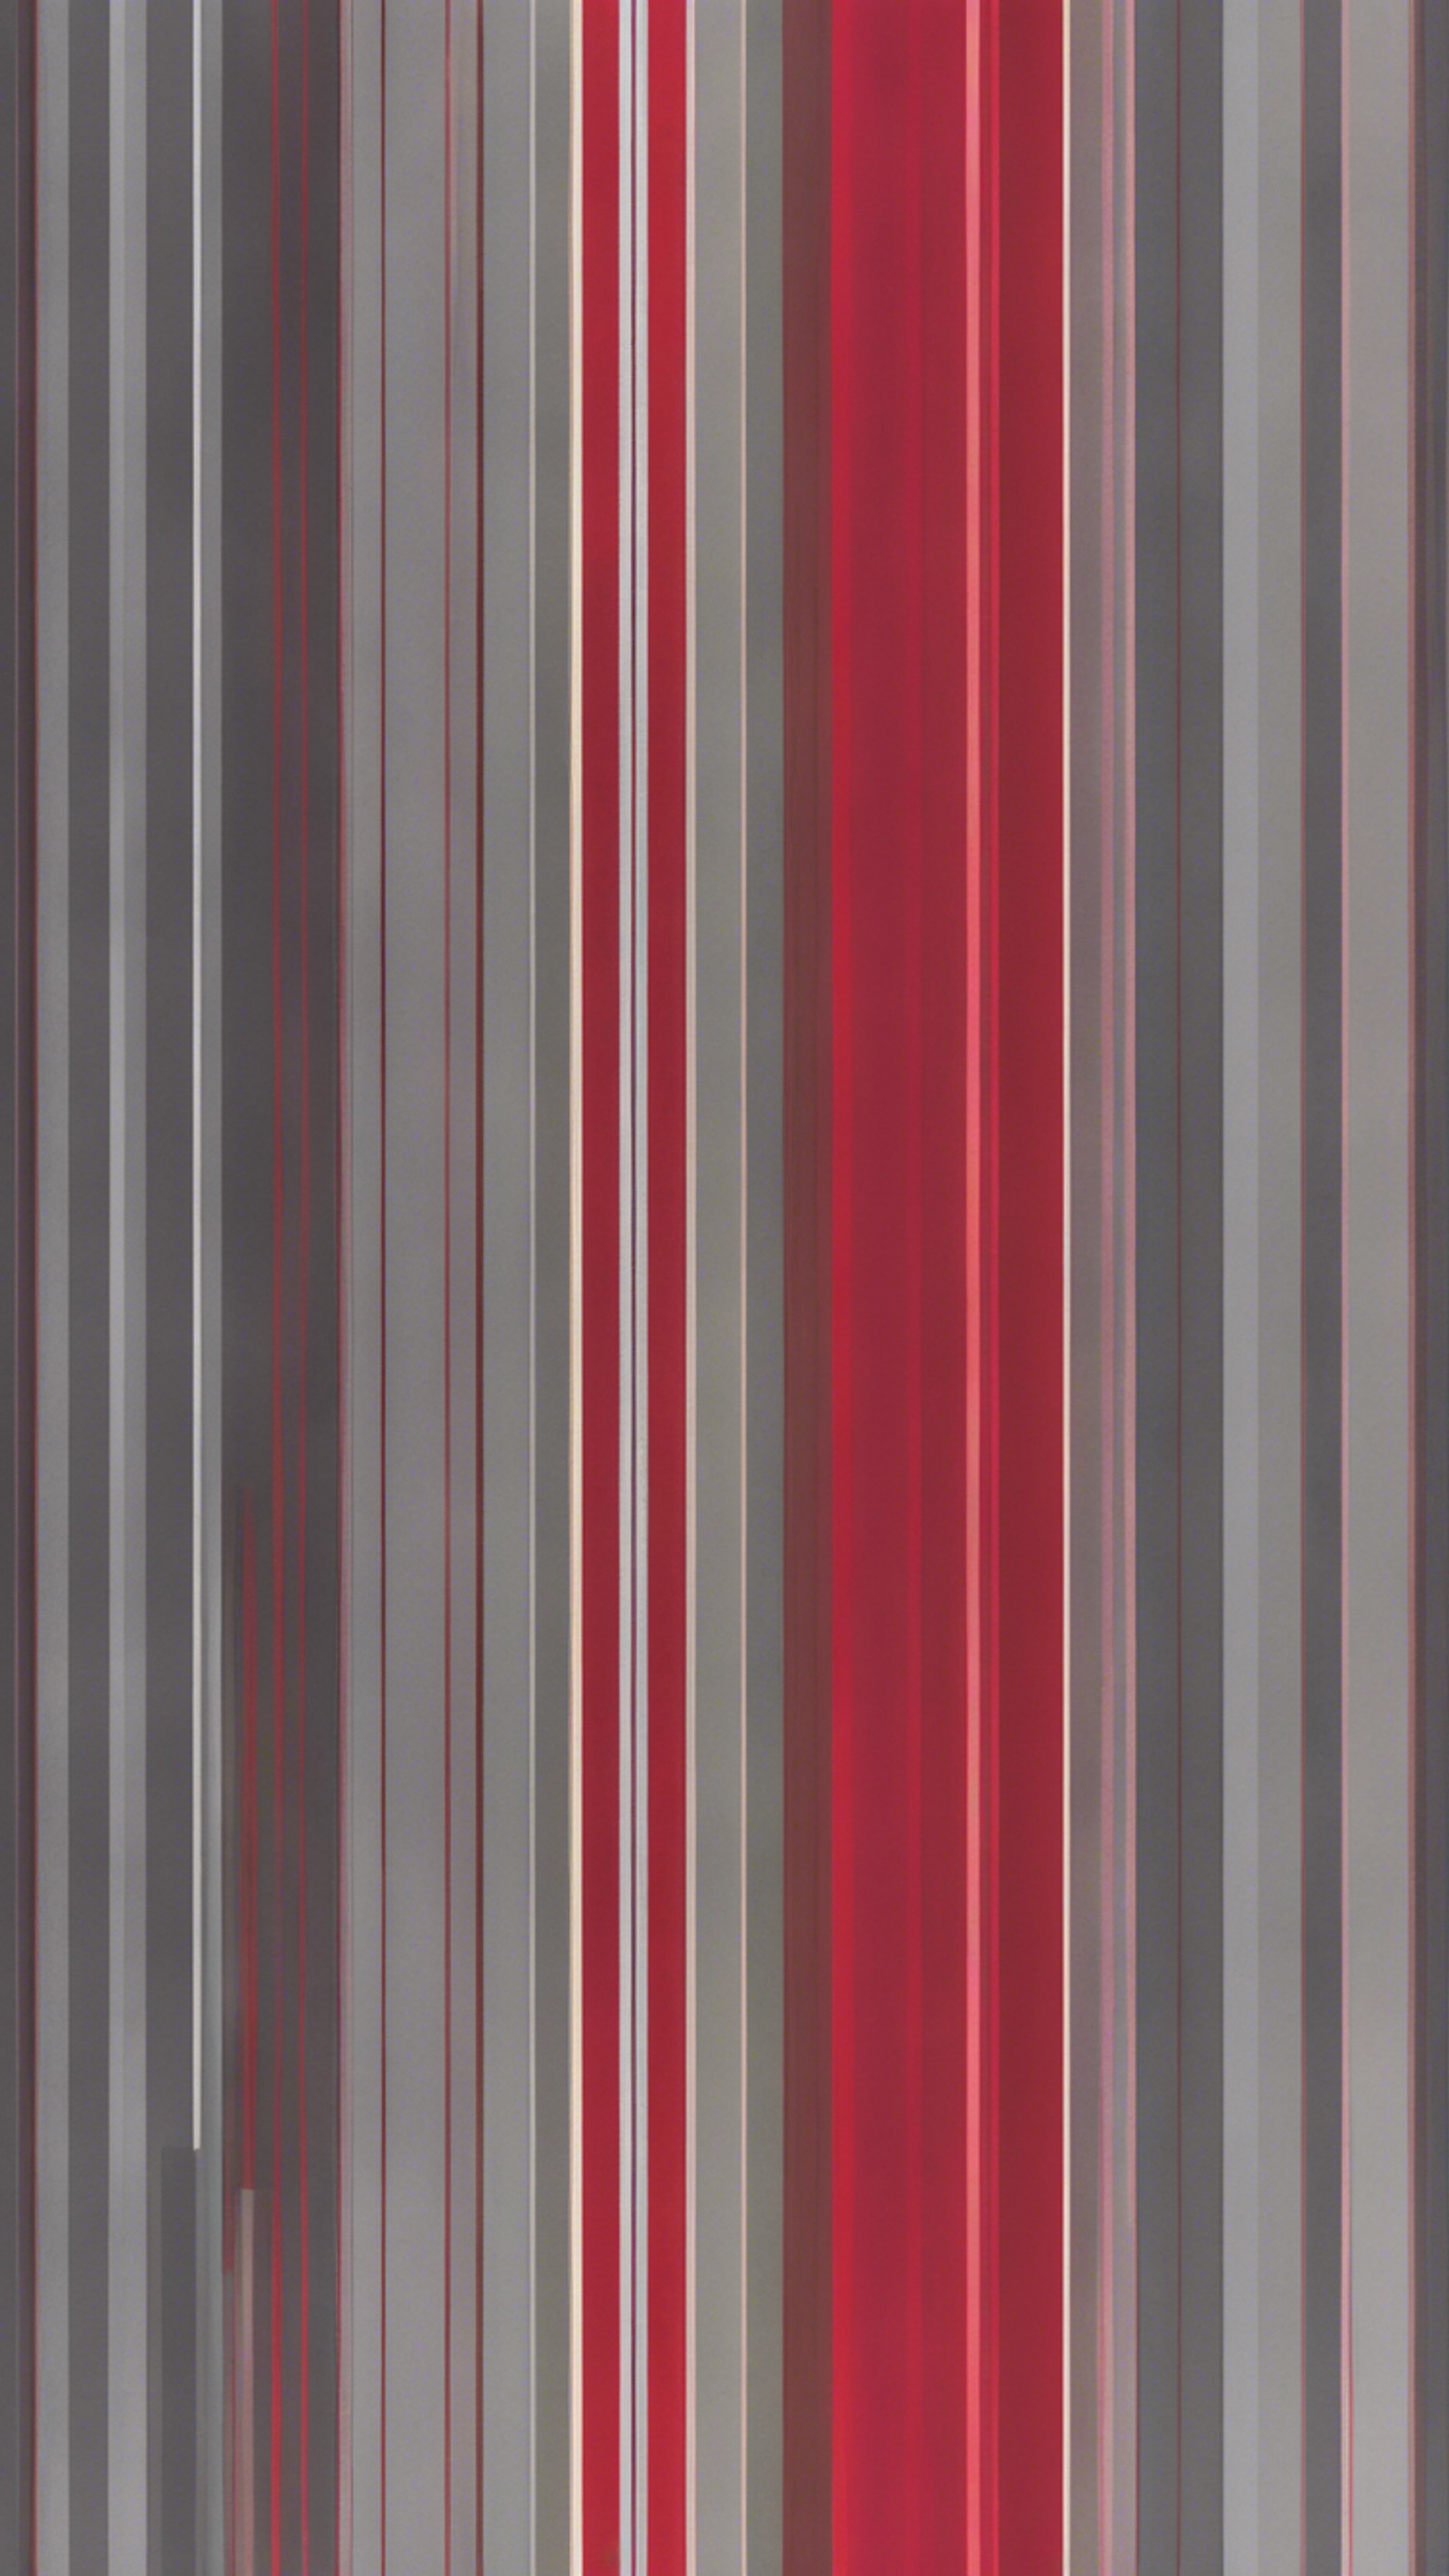 Pattern inspired by modern art, showcasing alternating bands of red and grey in a gradient arrangement.壁紙[fecd92d91f0c4817b510]